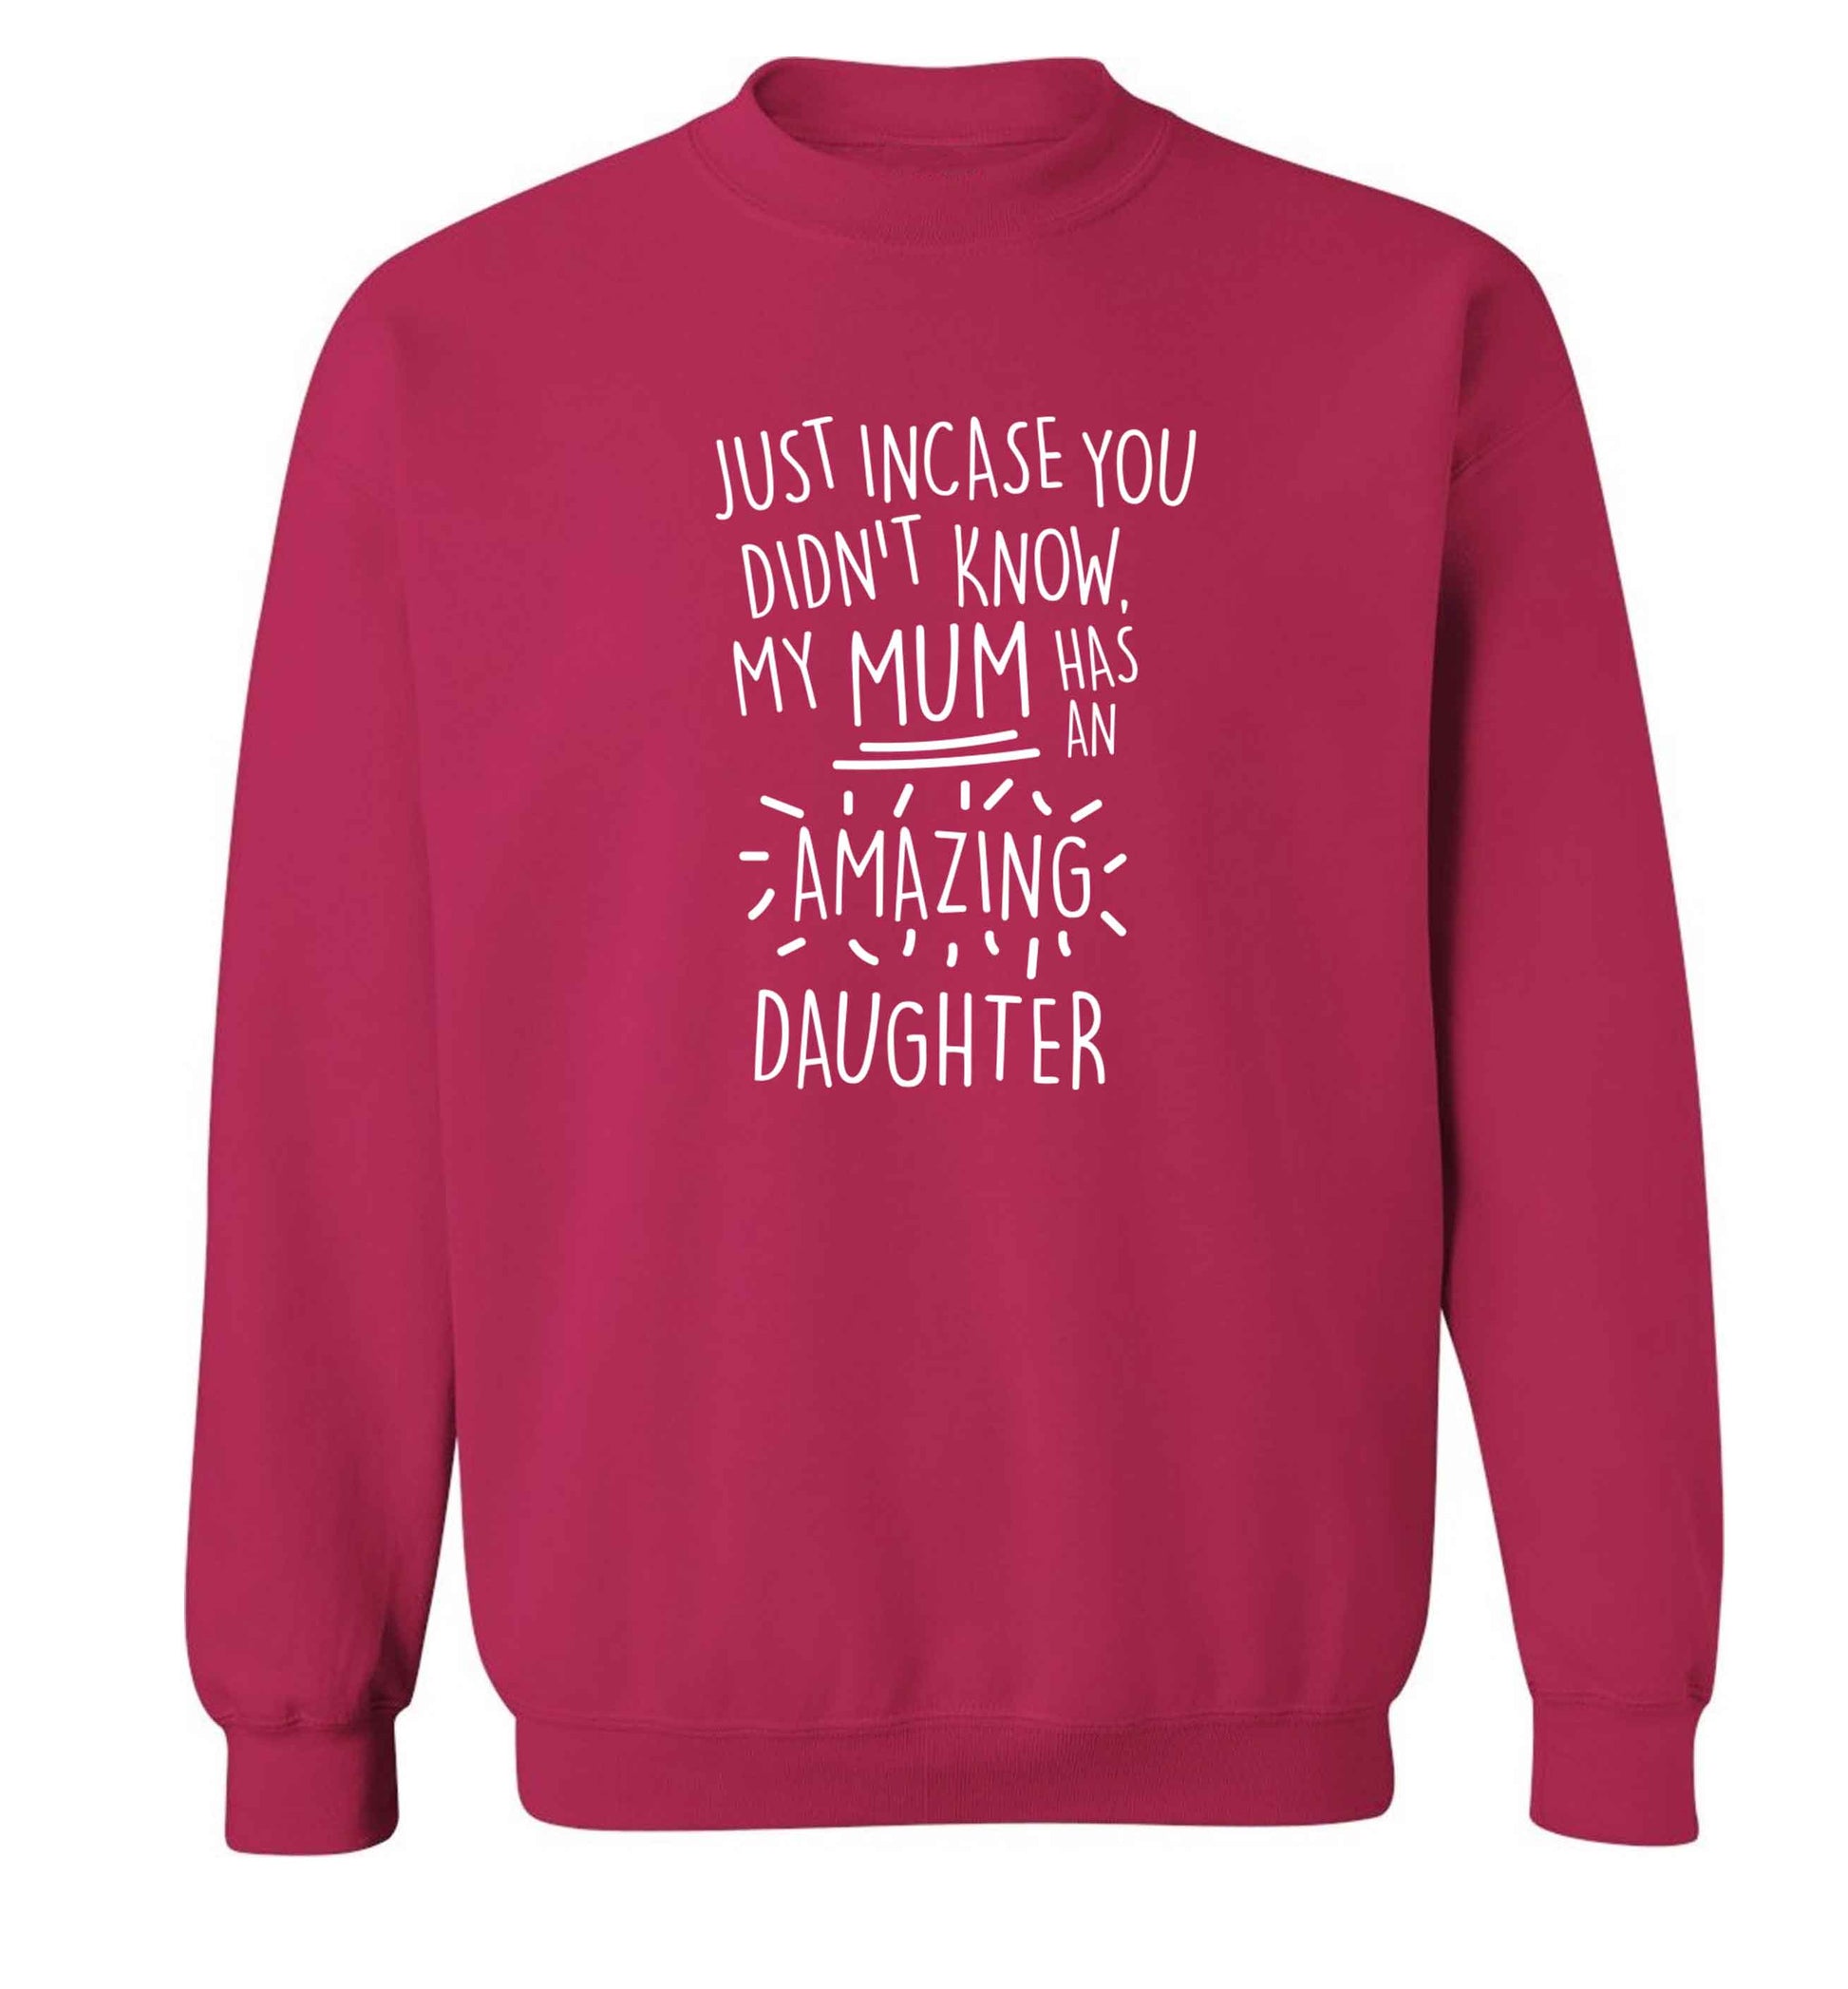 Just incase you didn't know my mum has an amazing daughter adult's unisex pink sweater 2XL